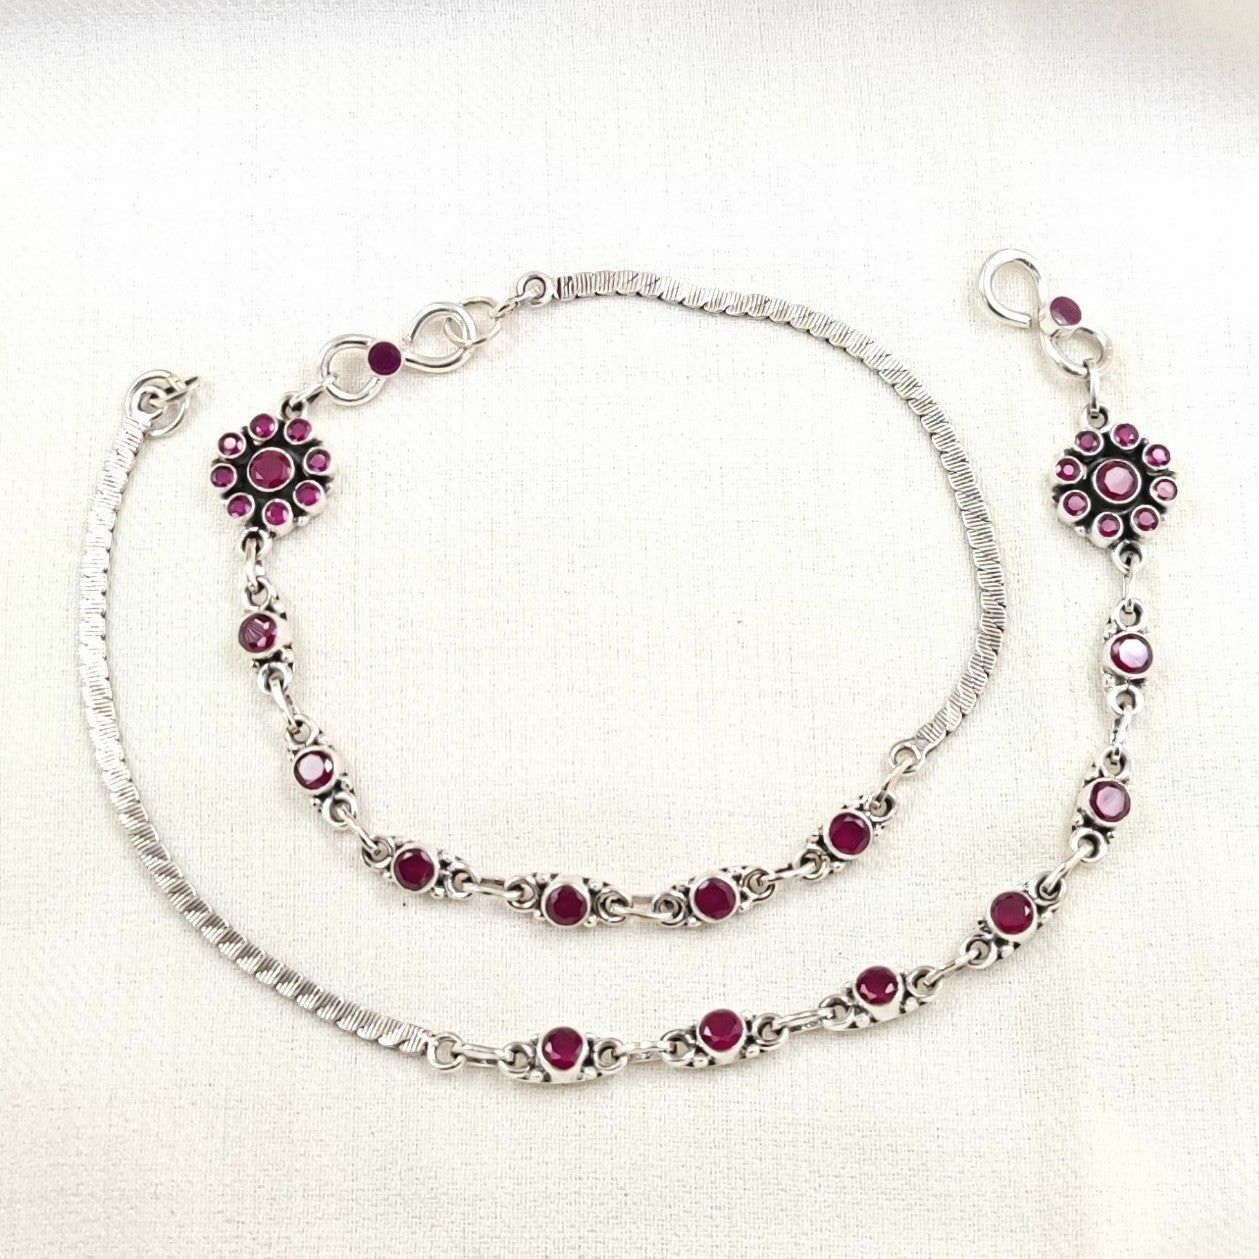 Silver Jewelry Anklets by Jauhri 92.5 Silver - Red Flower Dot Anklets